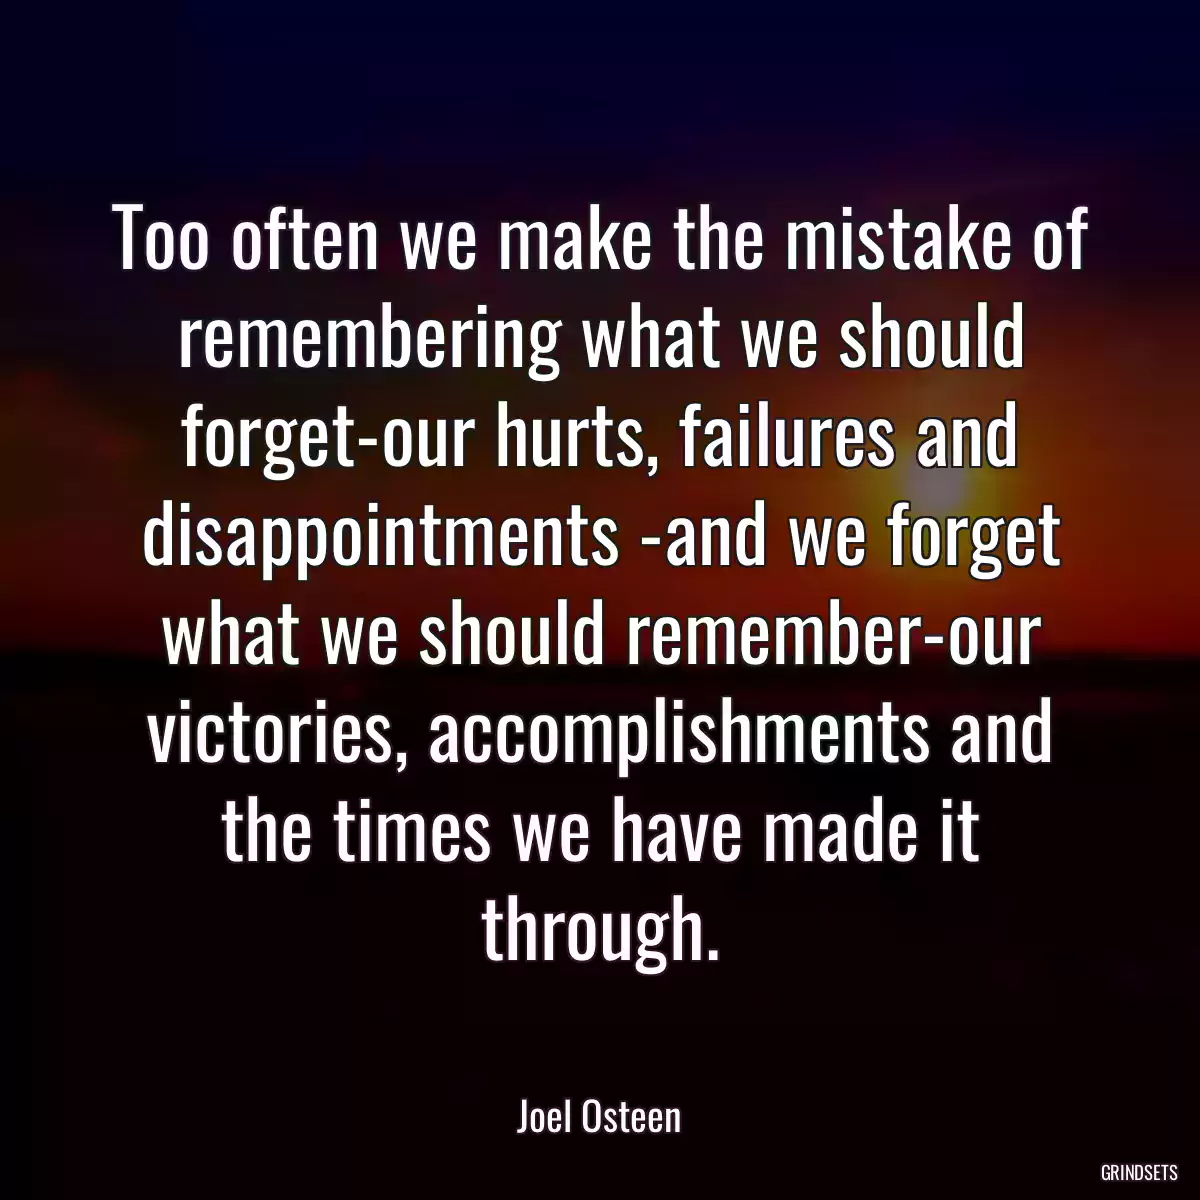 Too often we make the mistake of remembering what we should forget-our hurts, failures and disappointments -and we forget what we should remember-our victories, accomplishments and the times we have made it through.